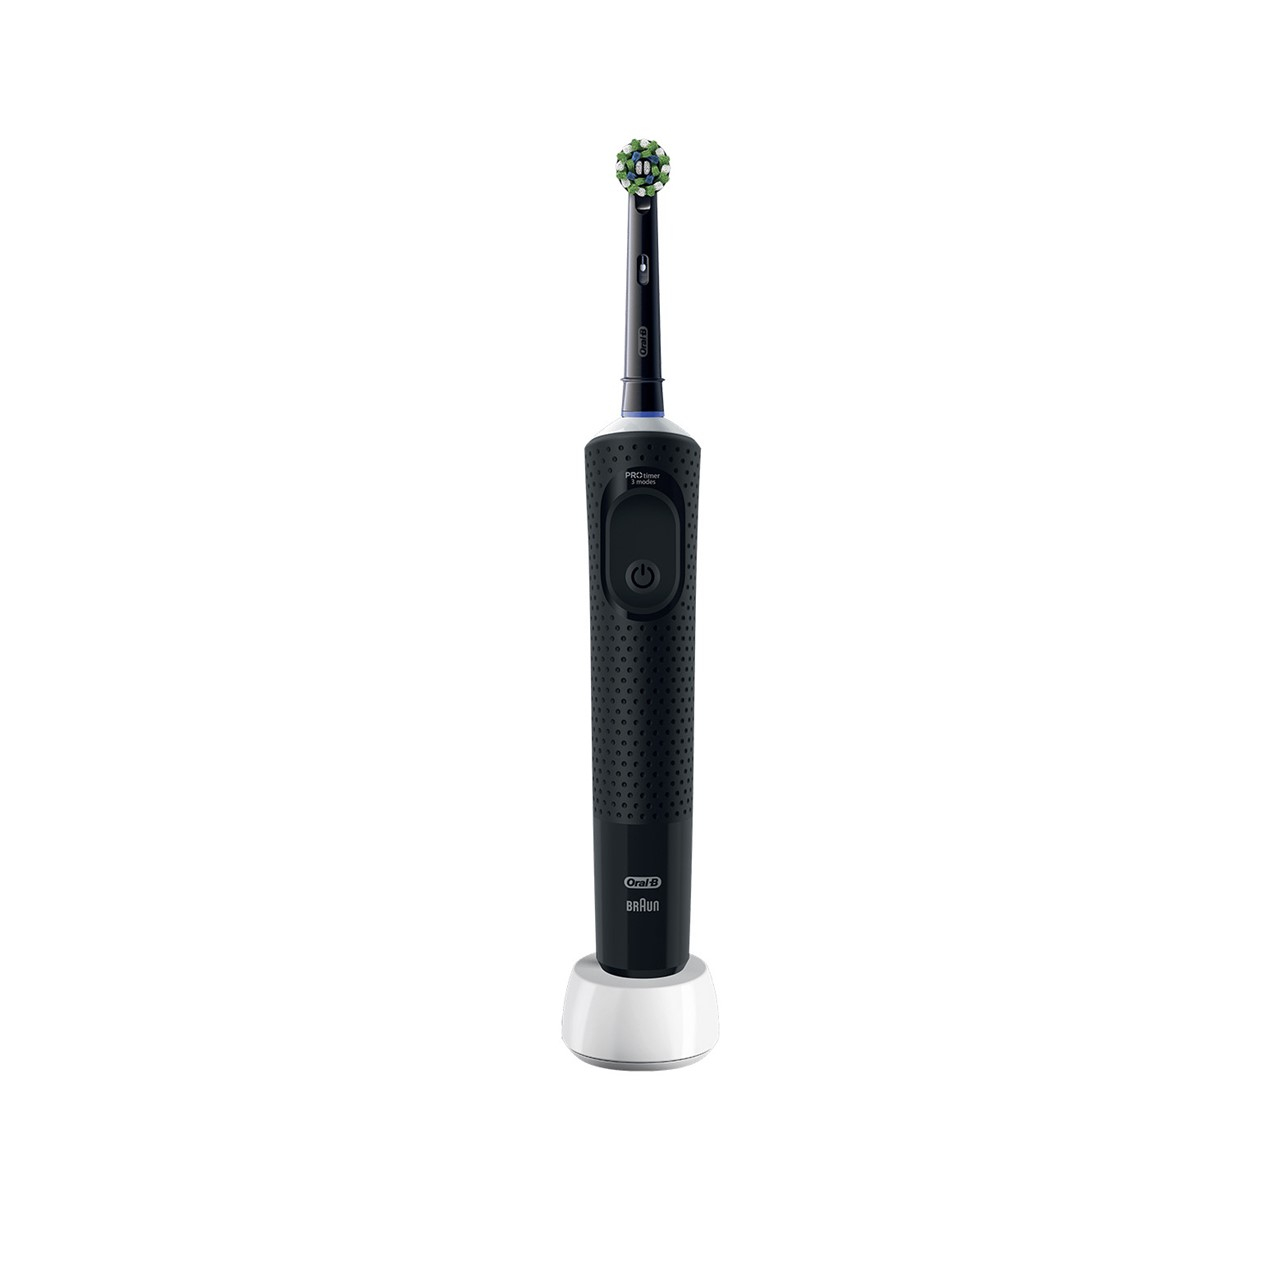 Oral-B, Vitality Extra Sensitive Clean Electric Toothbrush